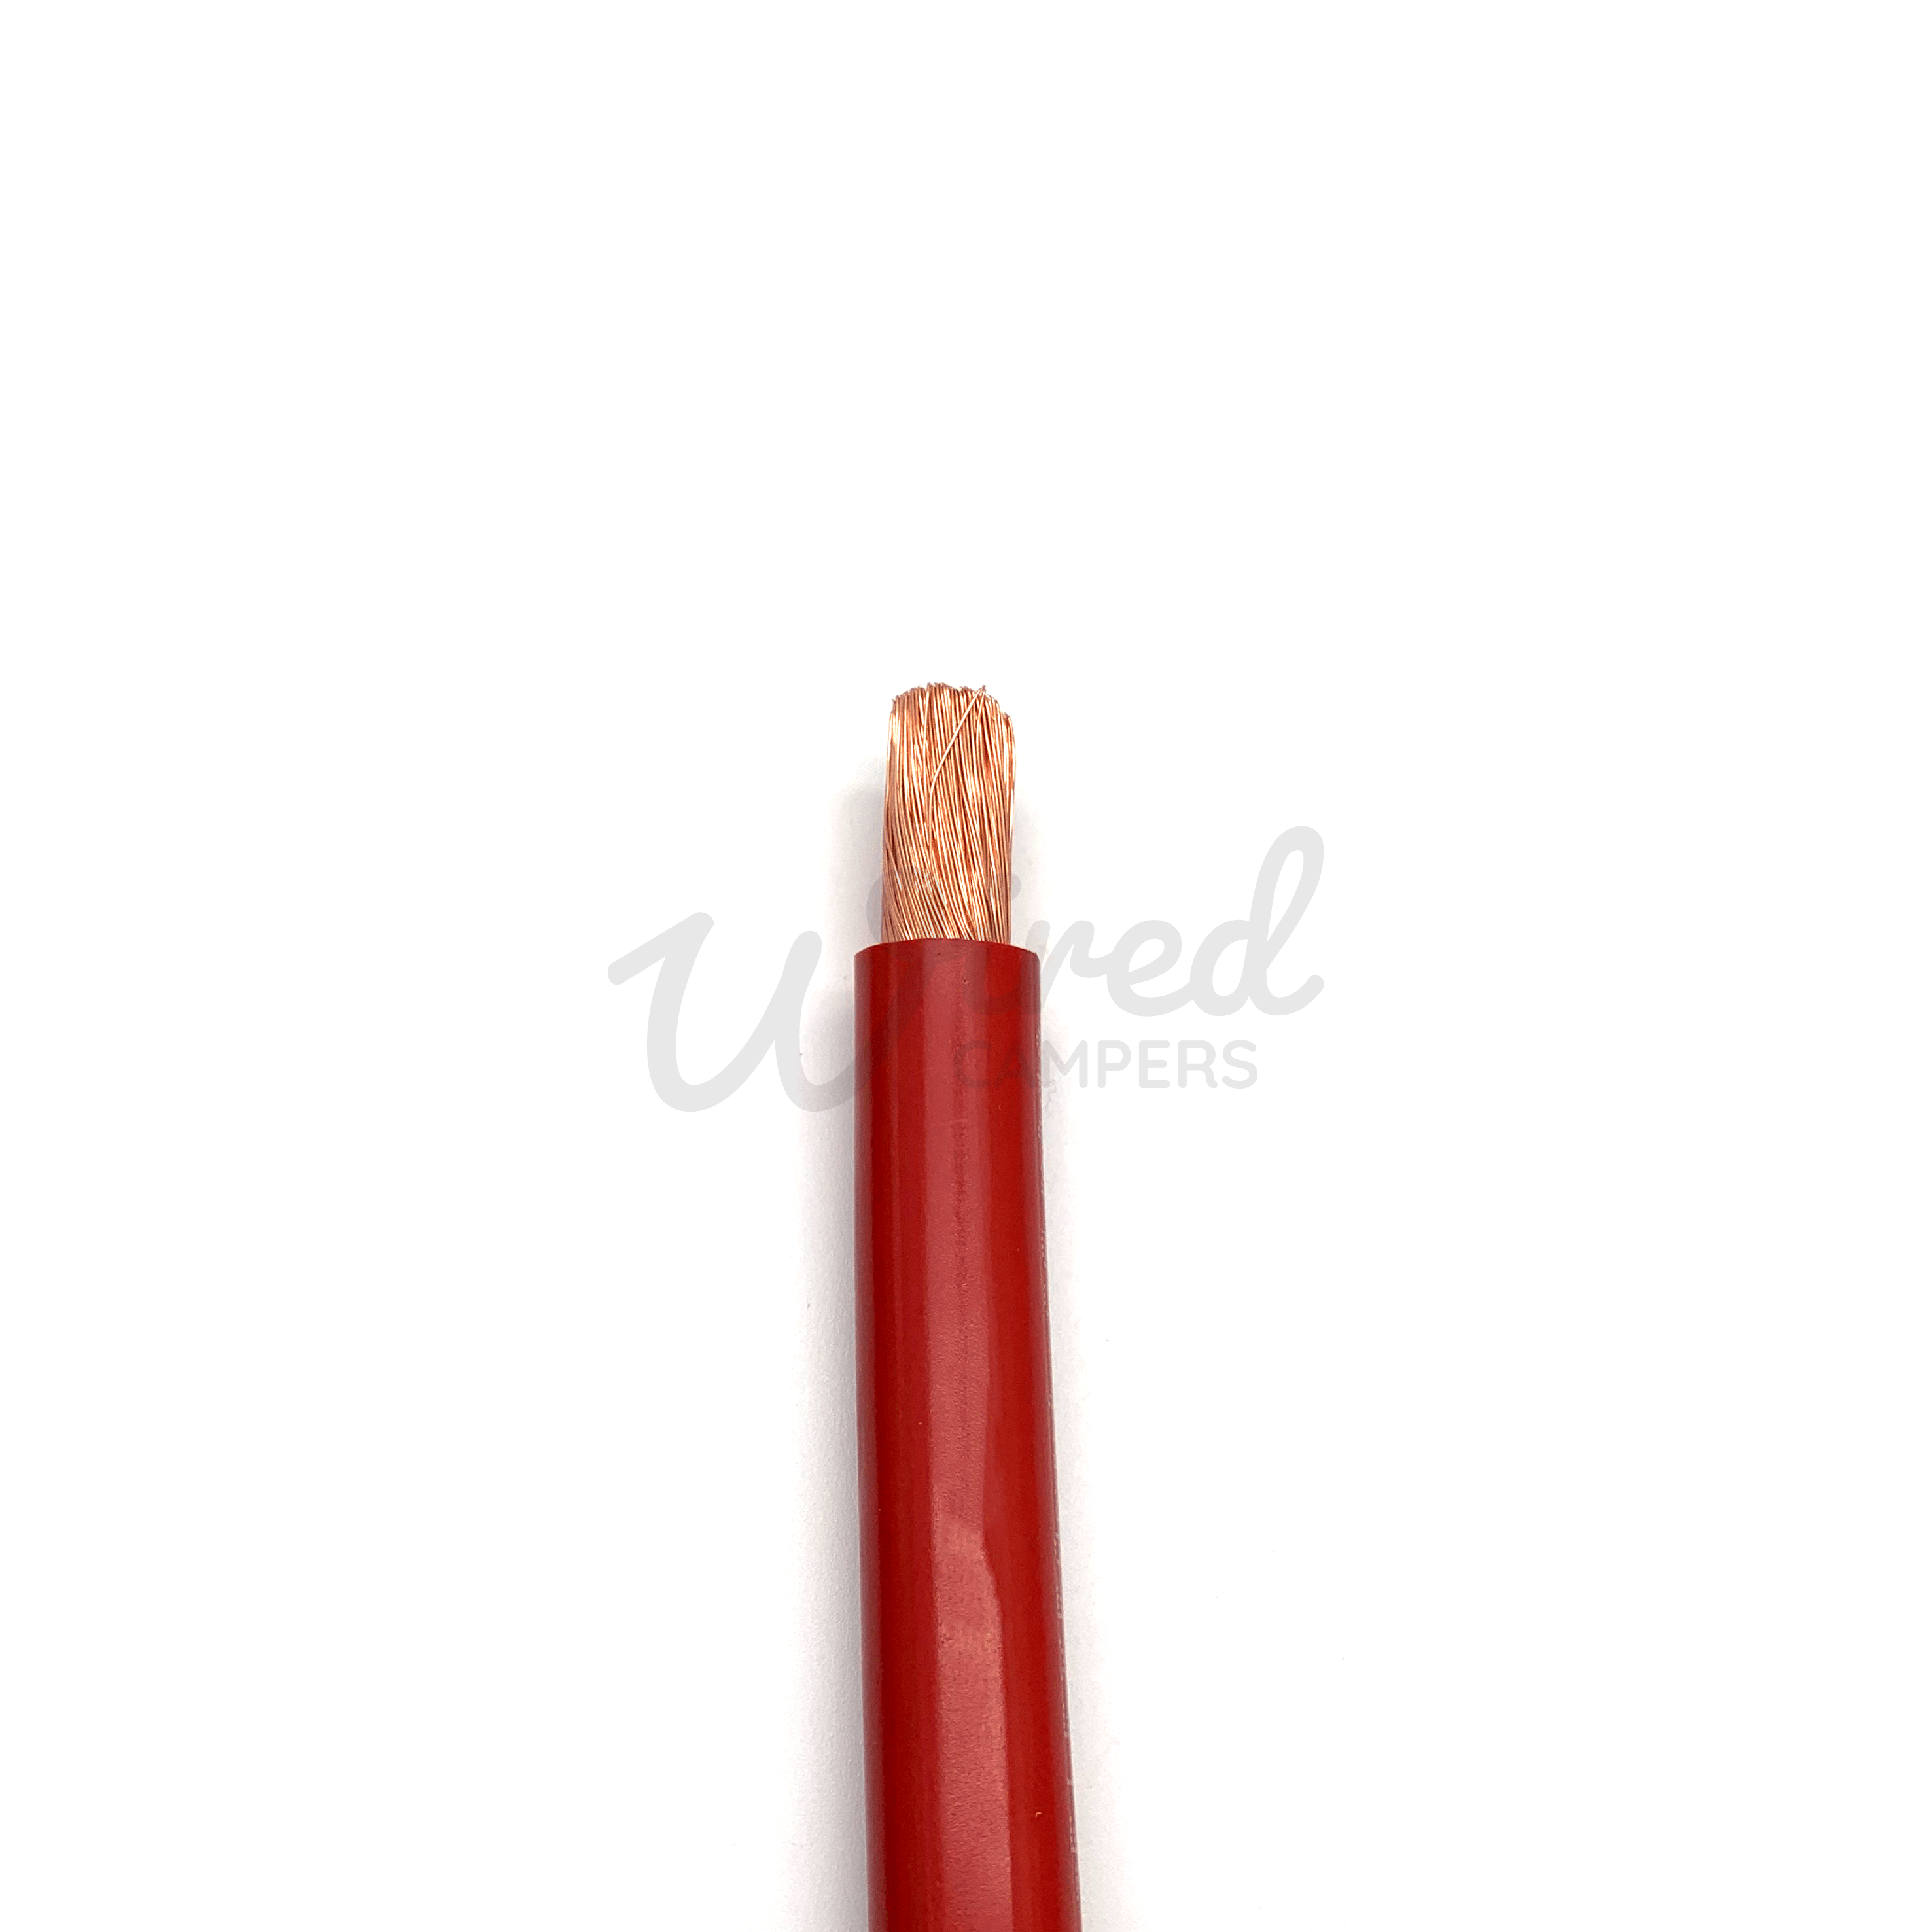 Wired Campers Limited 3M - 70mm² 485A Hi-Flex Battery/Welding/Inverter Flexible Cable - Red Positive